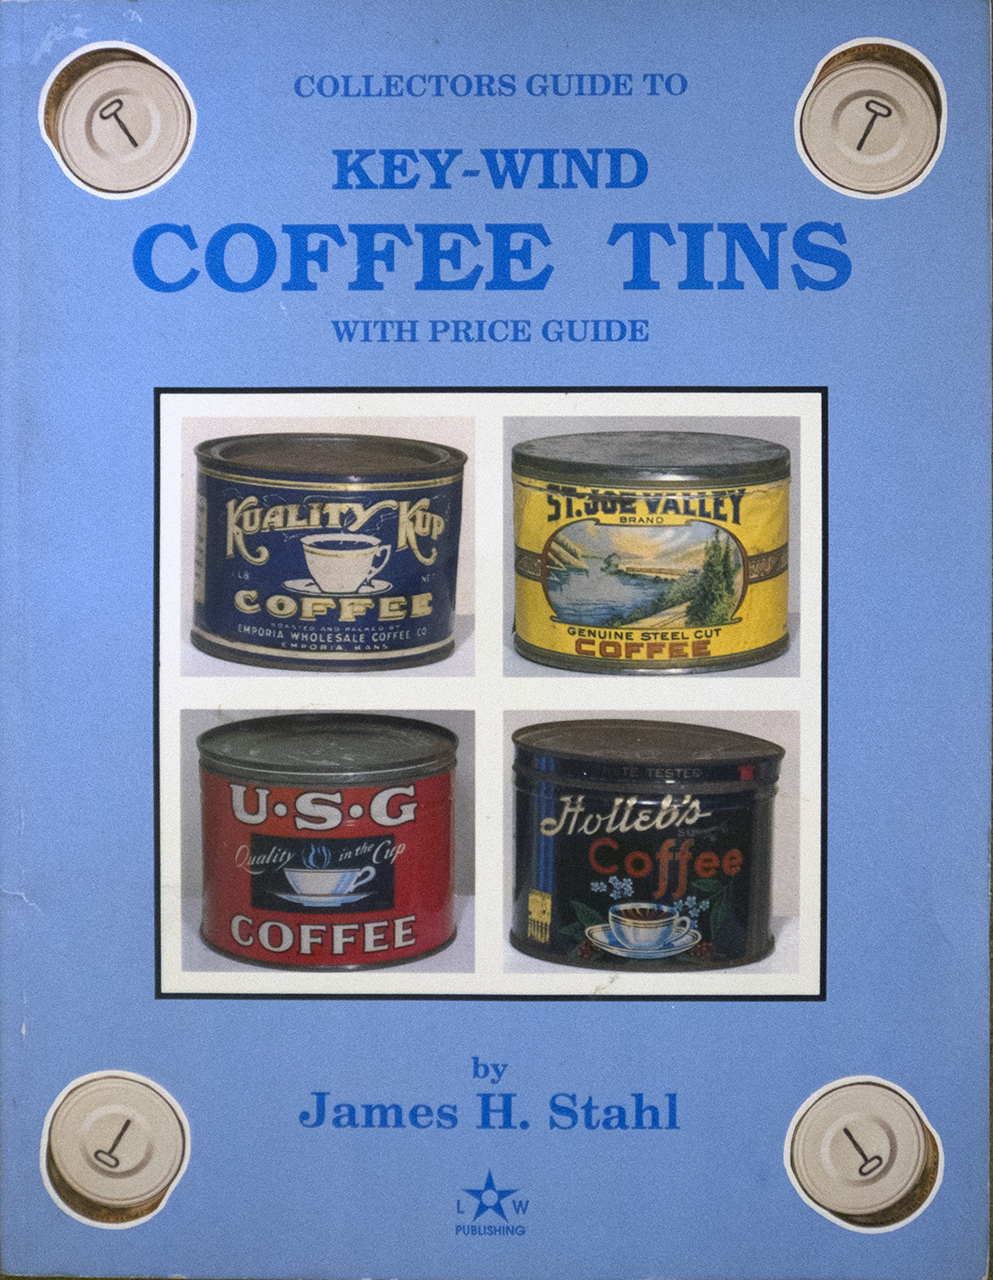 A Collector's Guide To Key-Wind Coffee Tins with Price Guide